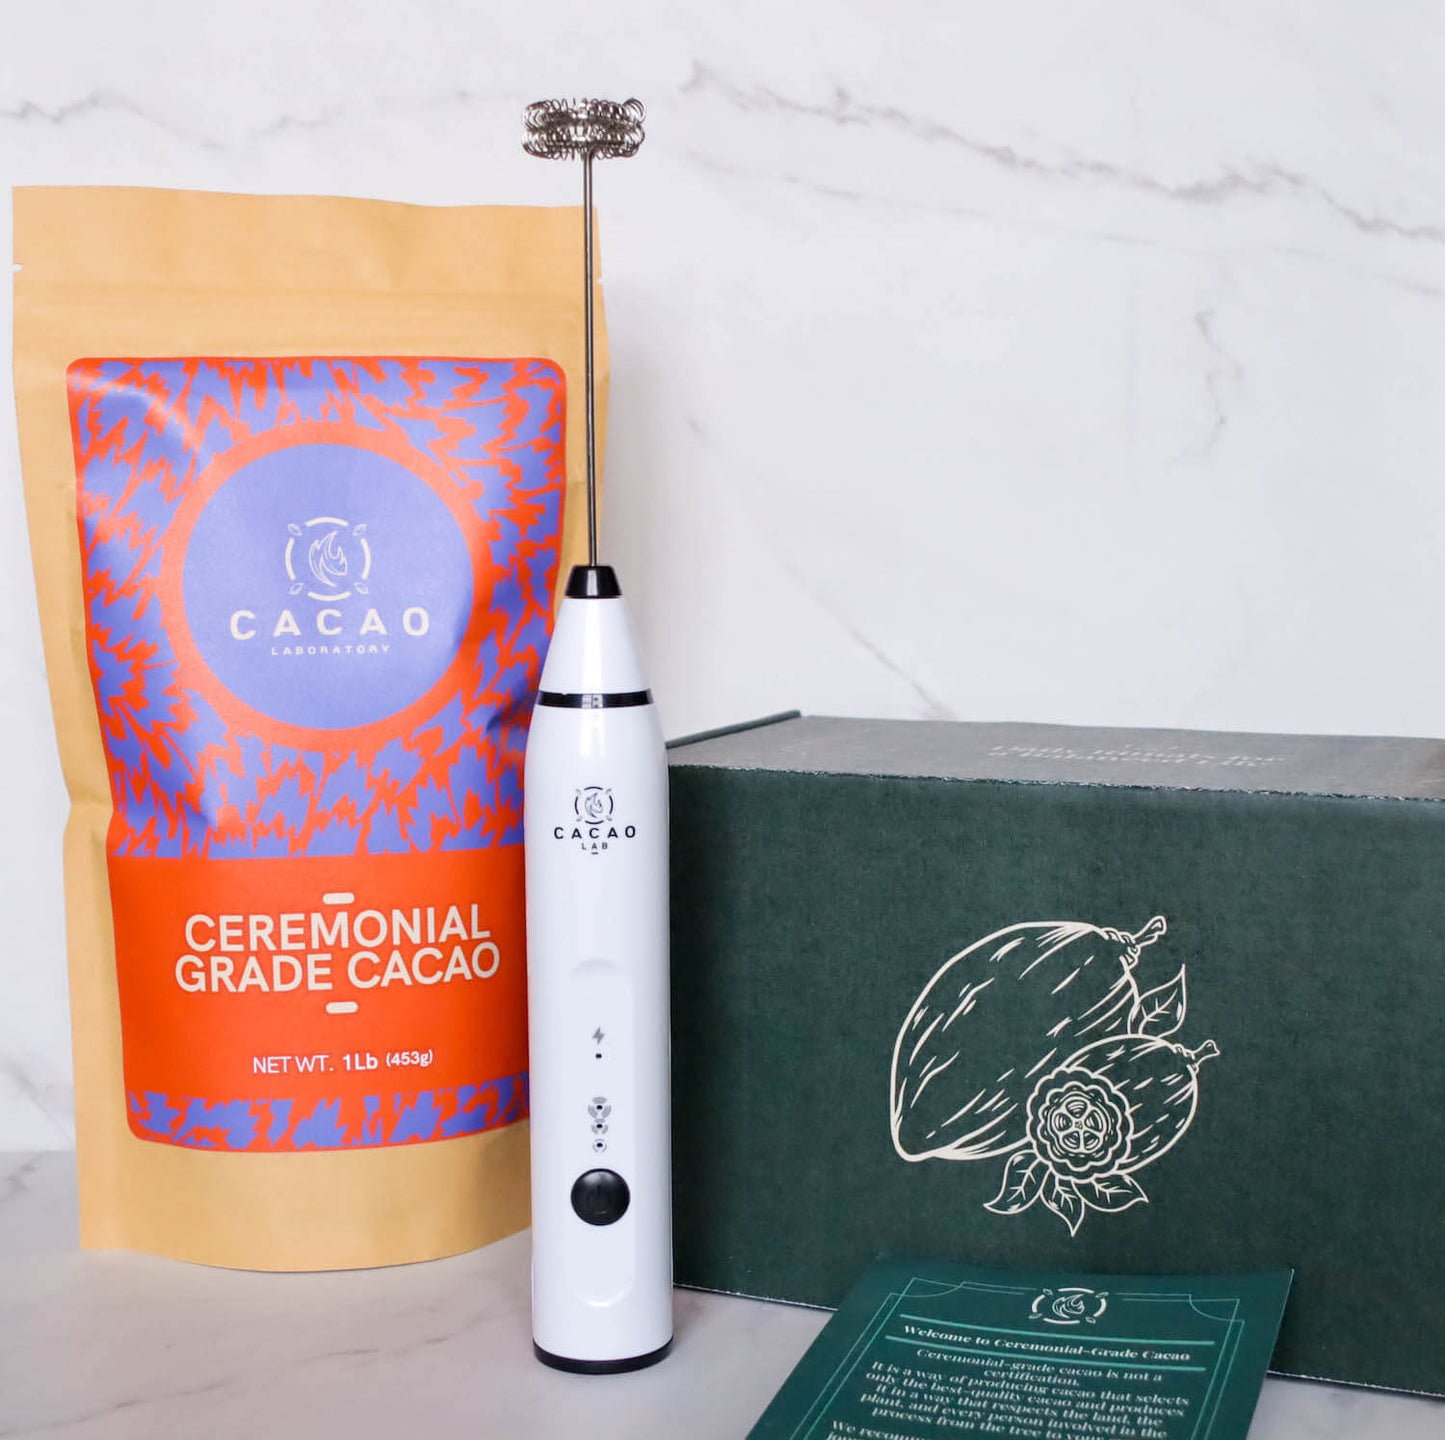 Ceremonial cacao ritual kit with one pound of granulated cacao, a branded frother, cacao guide, and panela sugar